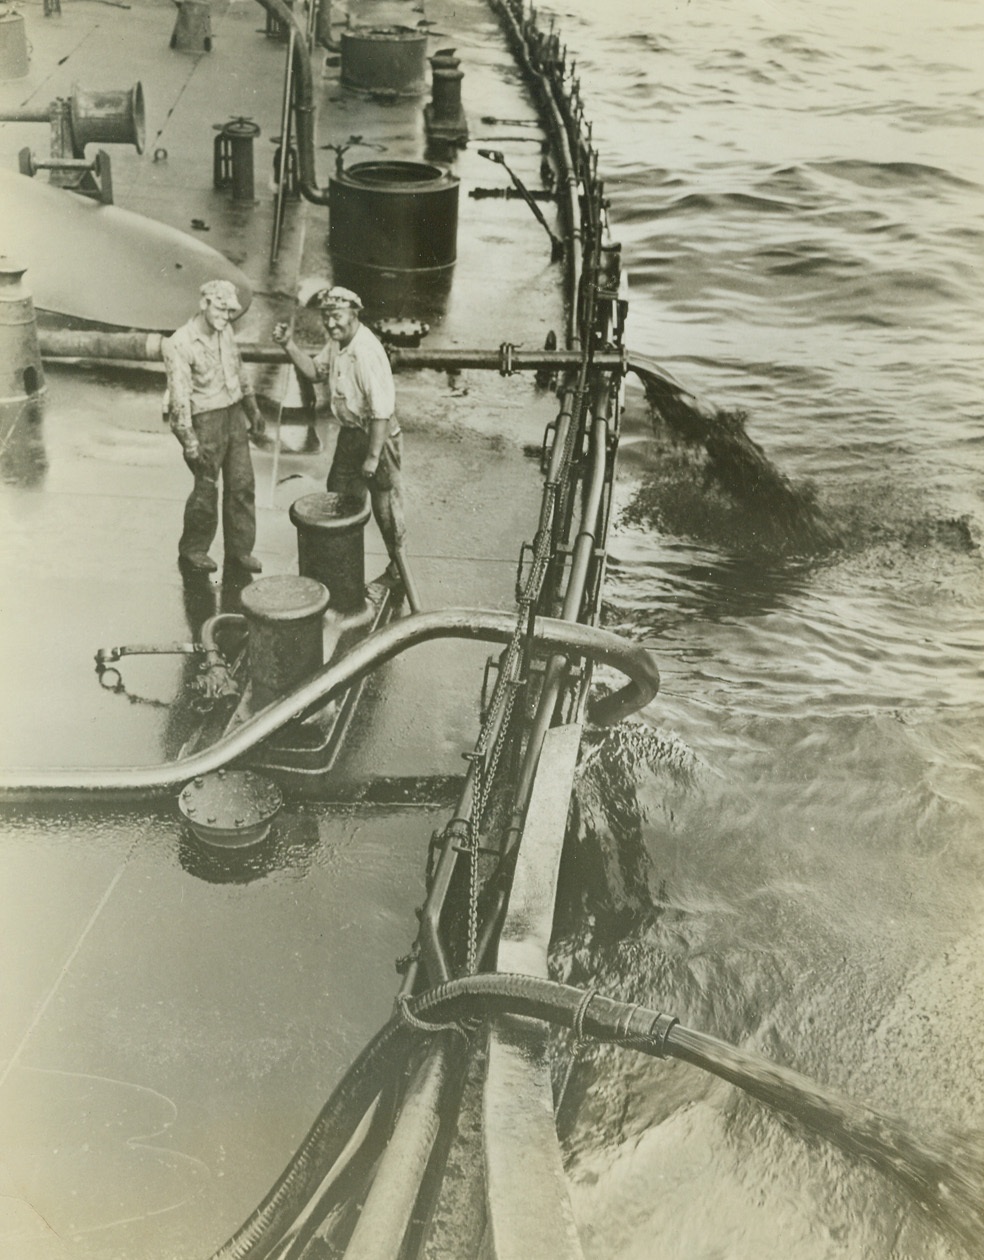 Saga of the Atlantic, 9/28/1942. Somewhere in the Atlantic – After being torpedoed by an Axis submarine, seamen, in order to keep the ship on even keel after the fire, pump oil out of the ship to spread itself in the vast expanse of the ocean. Note the clenched fist of the seaman on the right—another indication that the American Merchant Sailors are determined to carry on. Credit: Official U.S. Navy photo from ACME For release in A.M. of September 30, 1942;